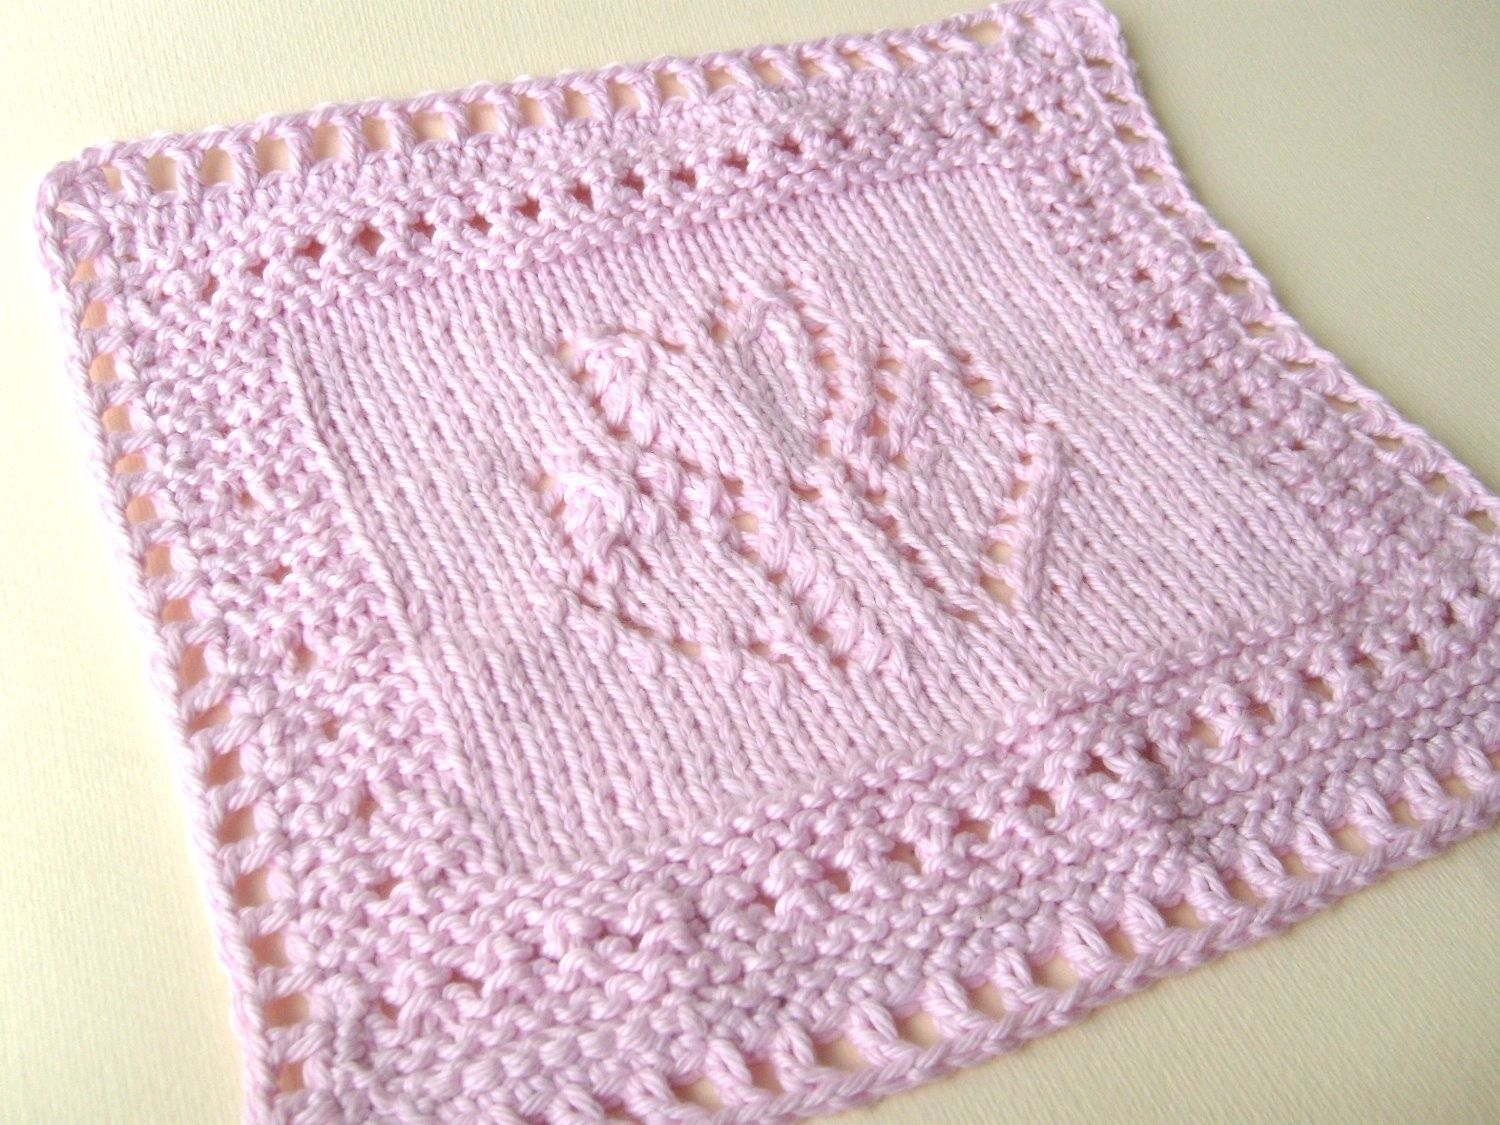 Knitted Hand Towel Patterns Hand Crafted Luxury Knit Wash Clothhand Towel Pretty Tulip Design